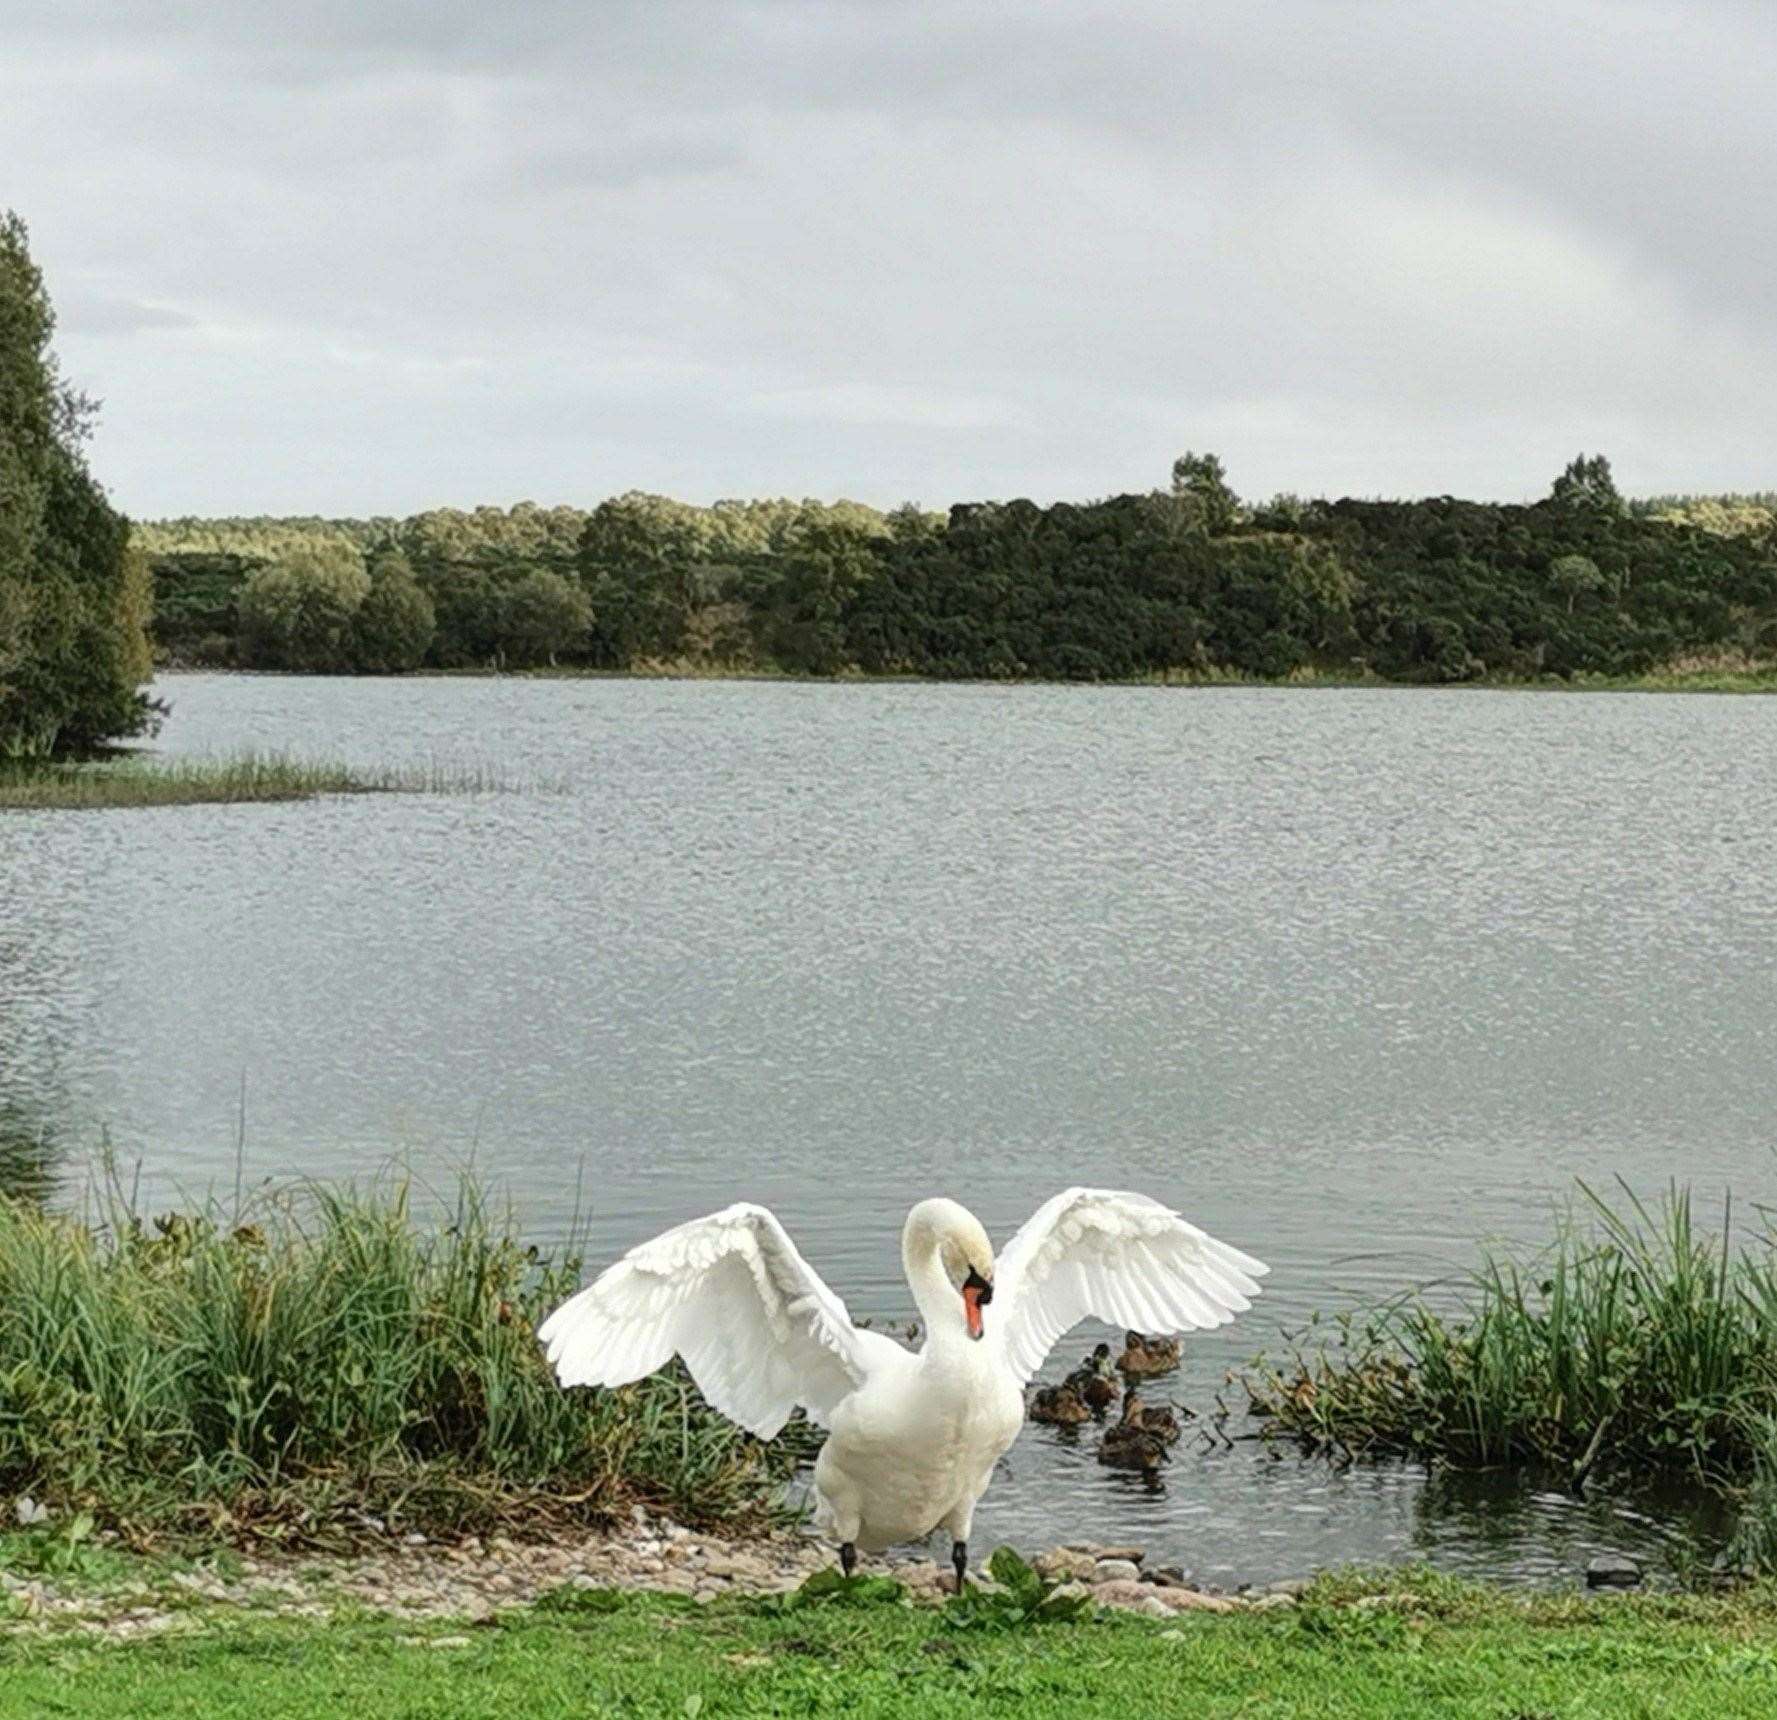 Swan stretching its wings at Loch Flemington. Picture: Moira MacKintosh